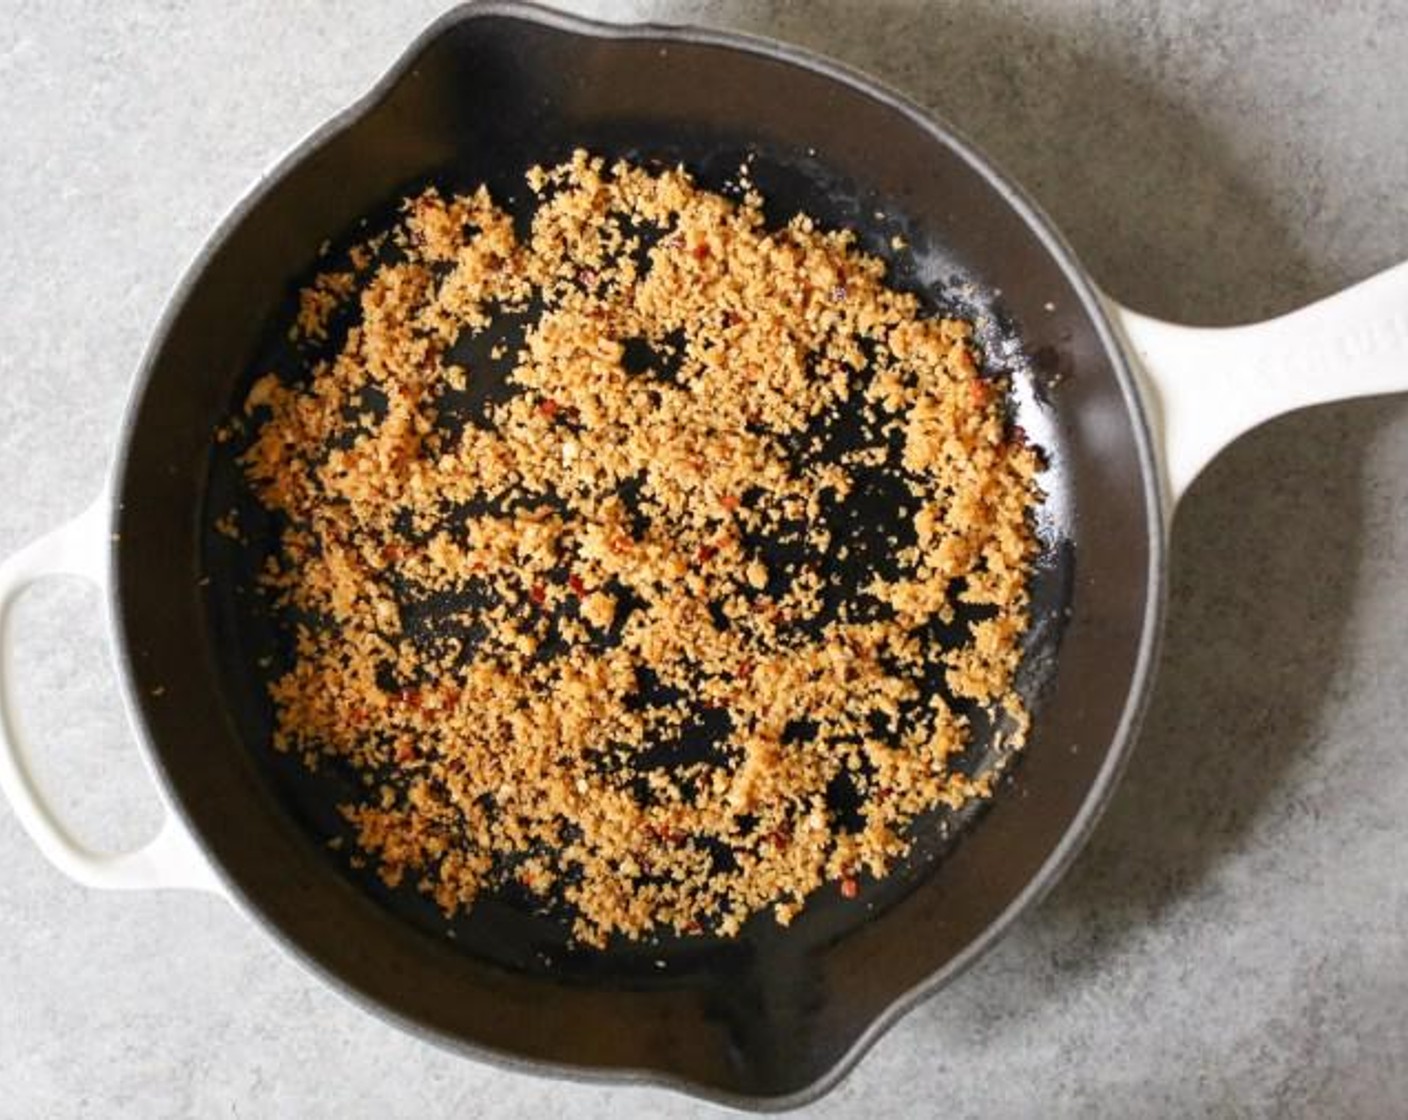 step 4 While the quinoa cooks, prep the panko topping. Heat Extra-Virgin Olive Oil (1/2 Tbsp) in a large ovenproof skillet or sauté pan over medium heat. When the oil is hot and shimmering, add the Garlic (2 cloves) and Crushed Red Pepper Flakes (1/2 tsp) and cook just until the garlic begins to turn golden, about 30 seconds.